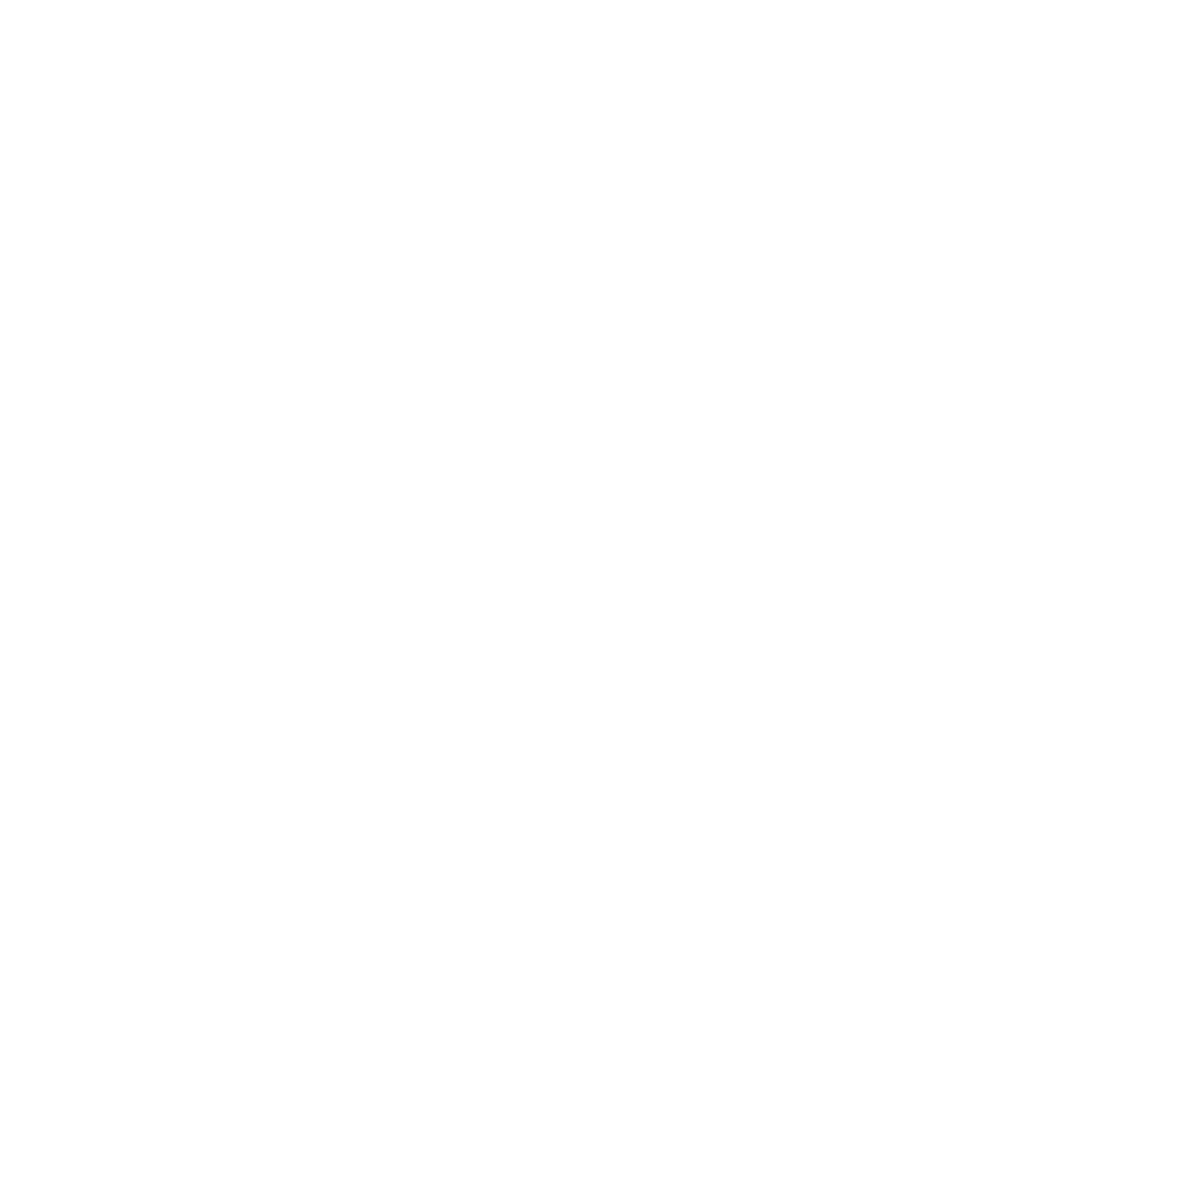 Early Childhood Assessment Support logo